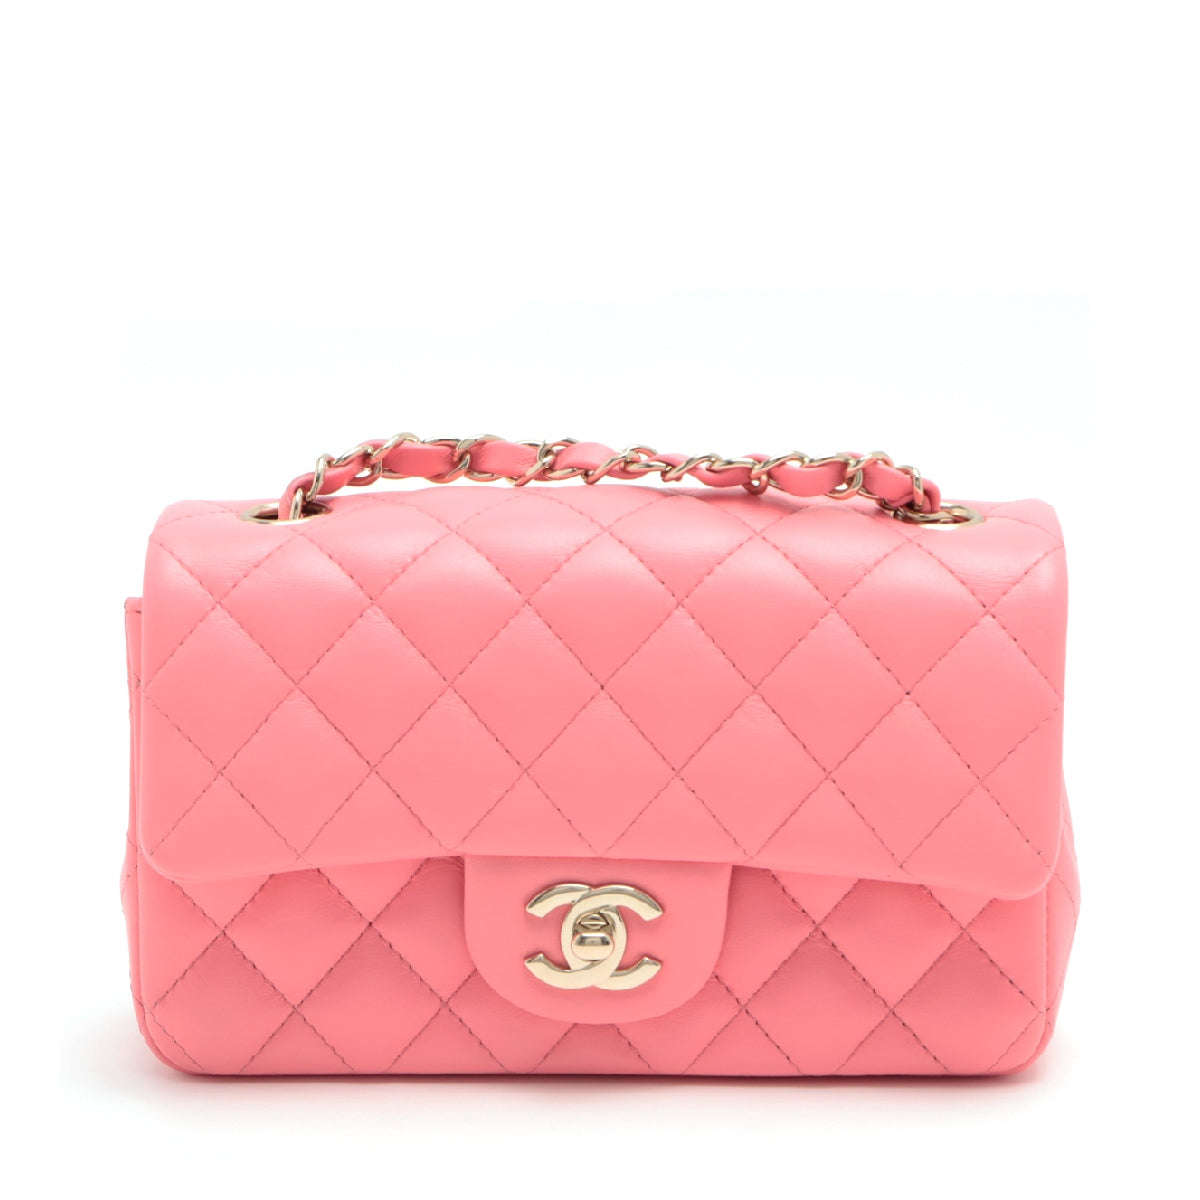 Chanel Matelasse Lambskin Single flap single chain bag Pink Gold Metal fittings There is an IC chip